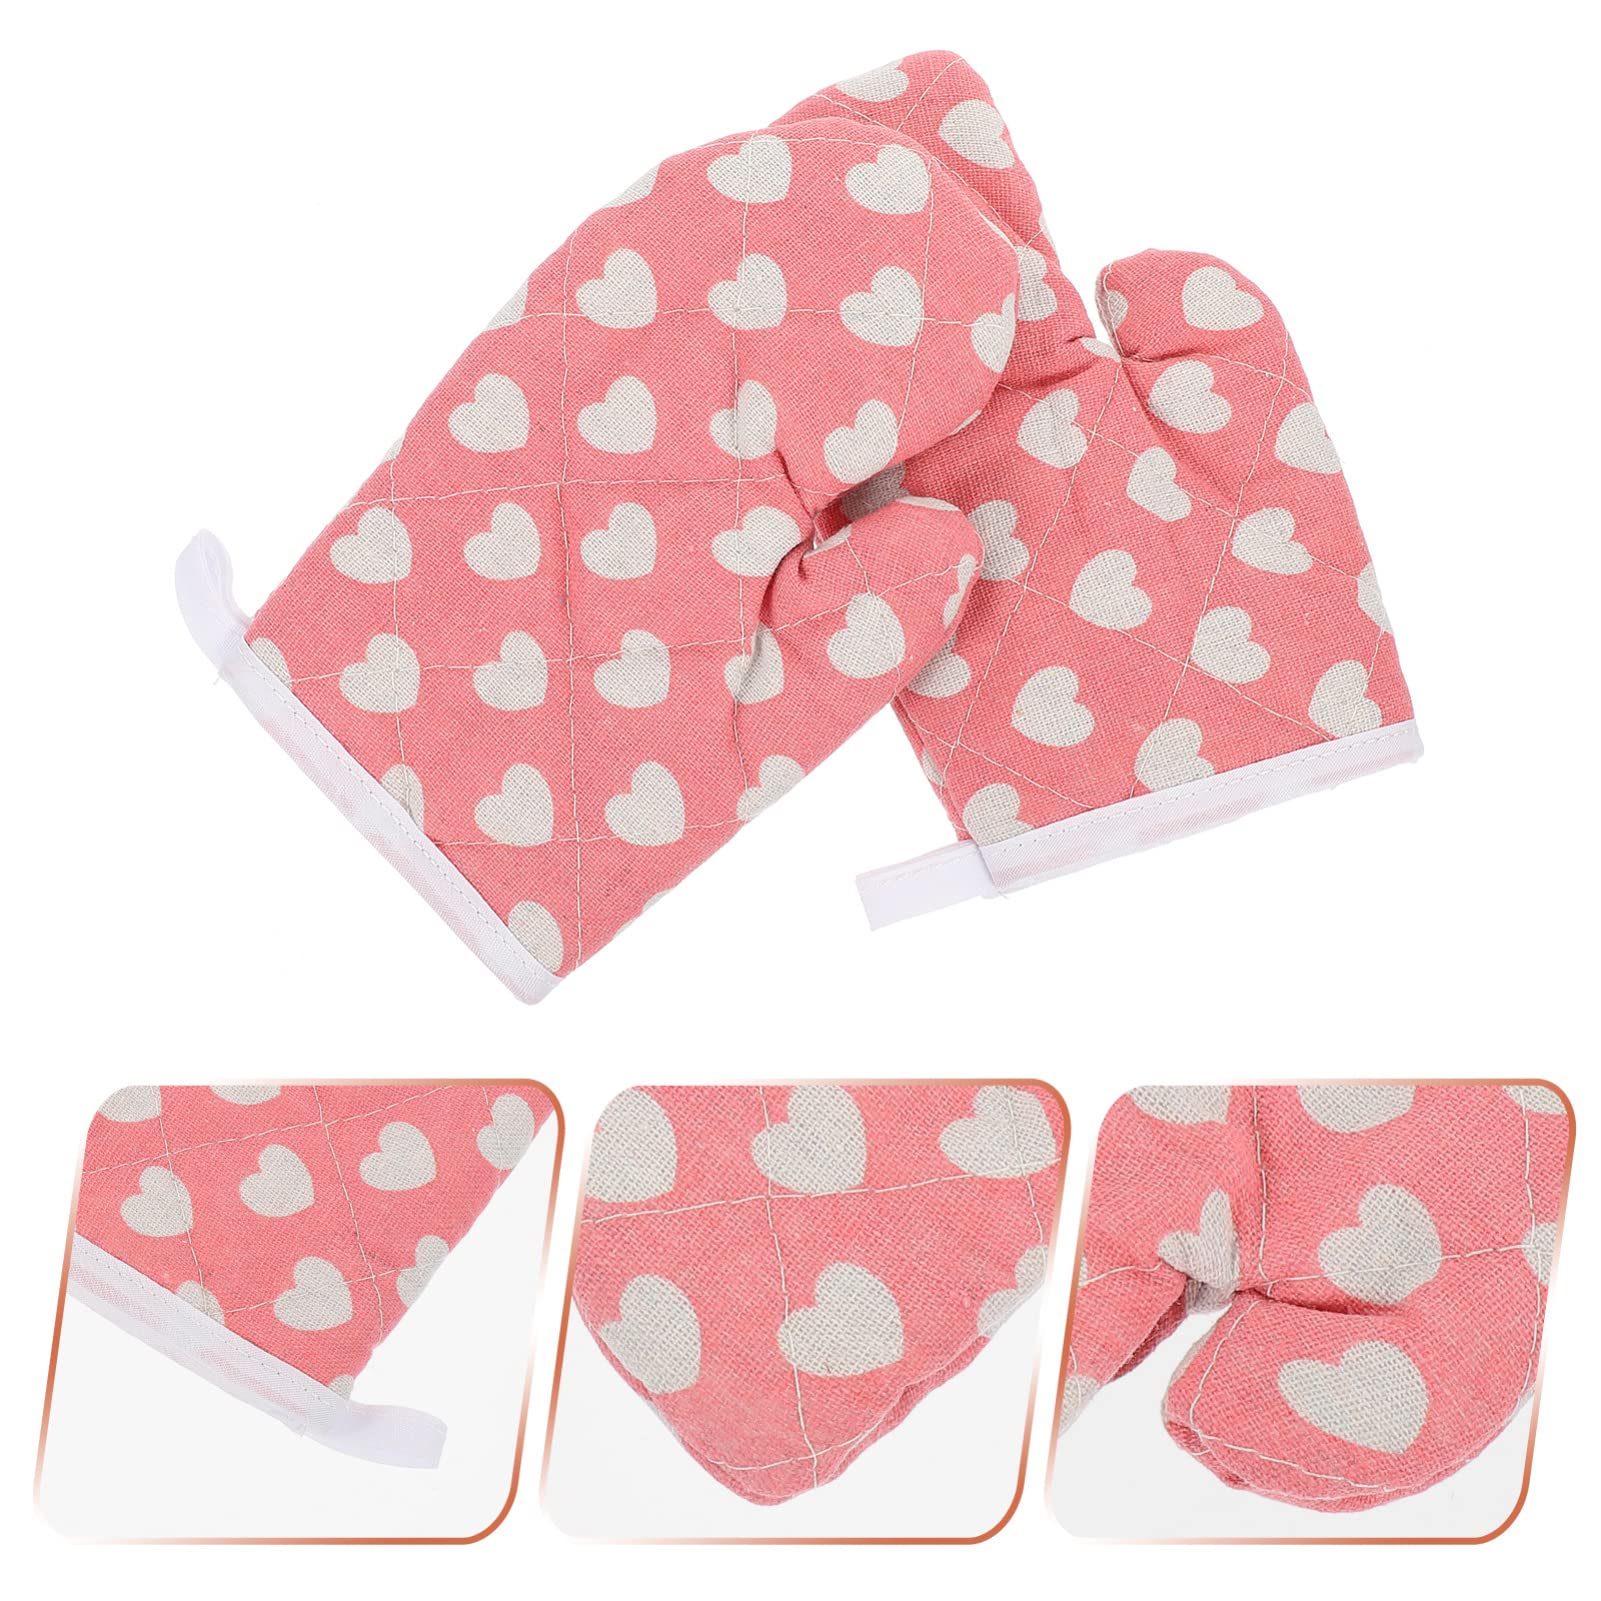 SOLUSTRE Oven Mitt Short Oven Mitts 2pcs Kids Oven Mitts Oven Gloves Kitchen Mitts Non Slip Baking Mitts for Kitchen Baking Fireplace Grill BBQ Heart Pattern Small Oven Mitts Oven Glove